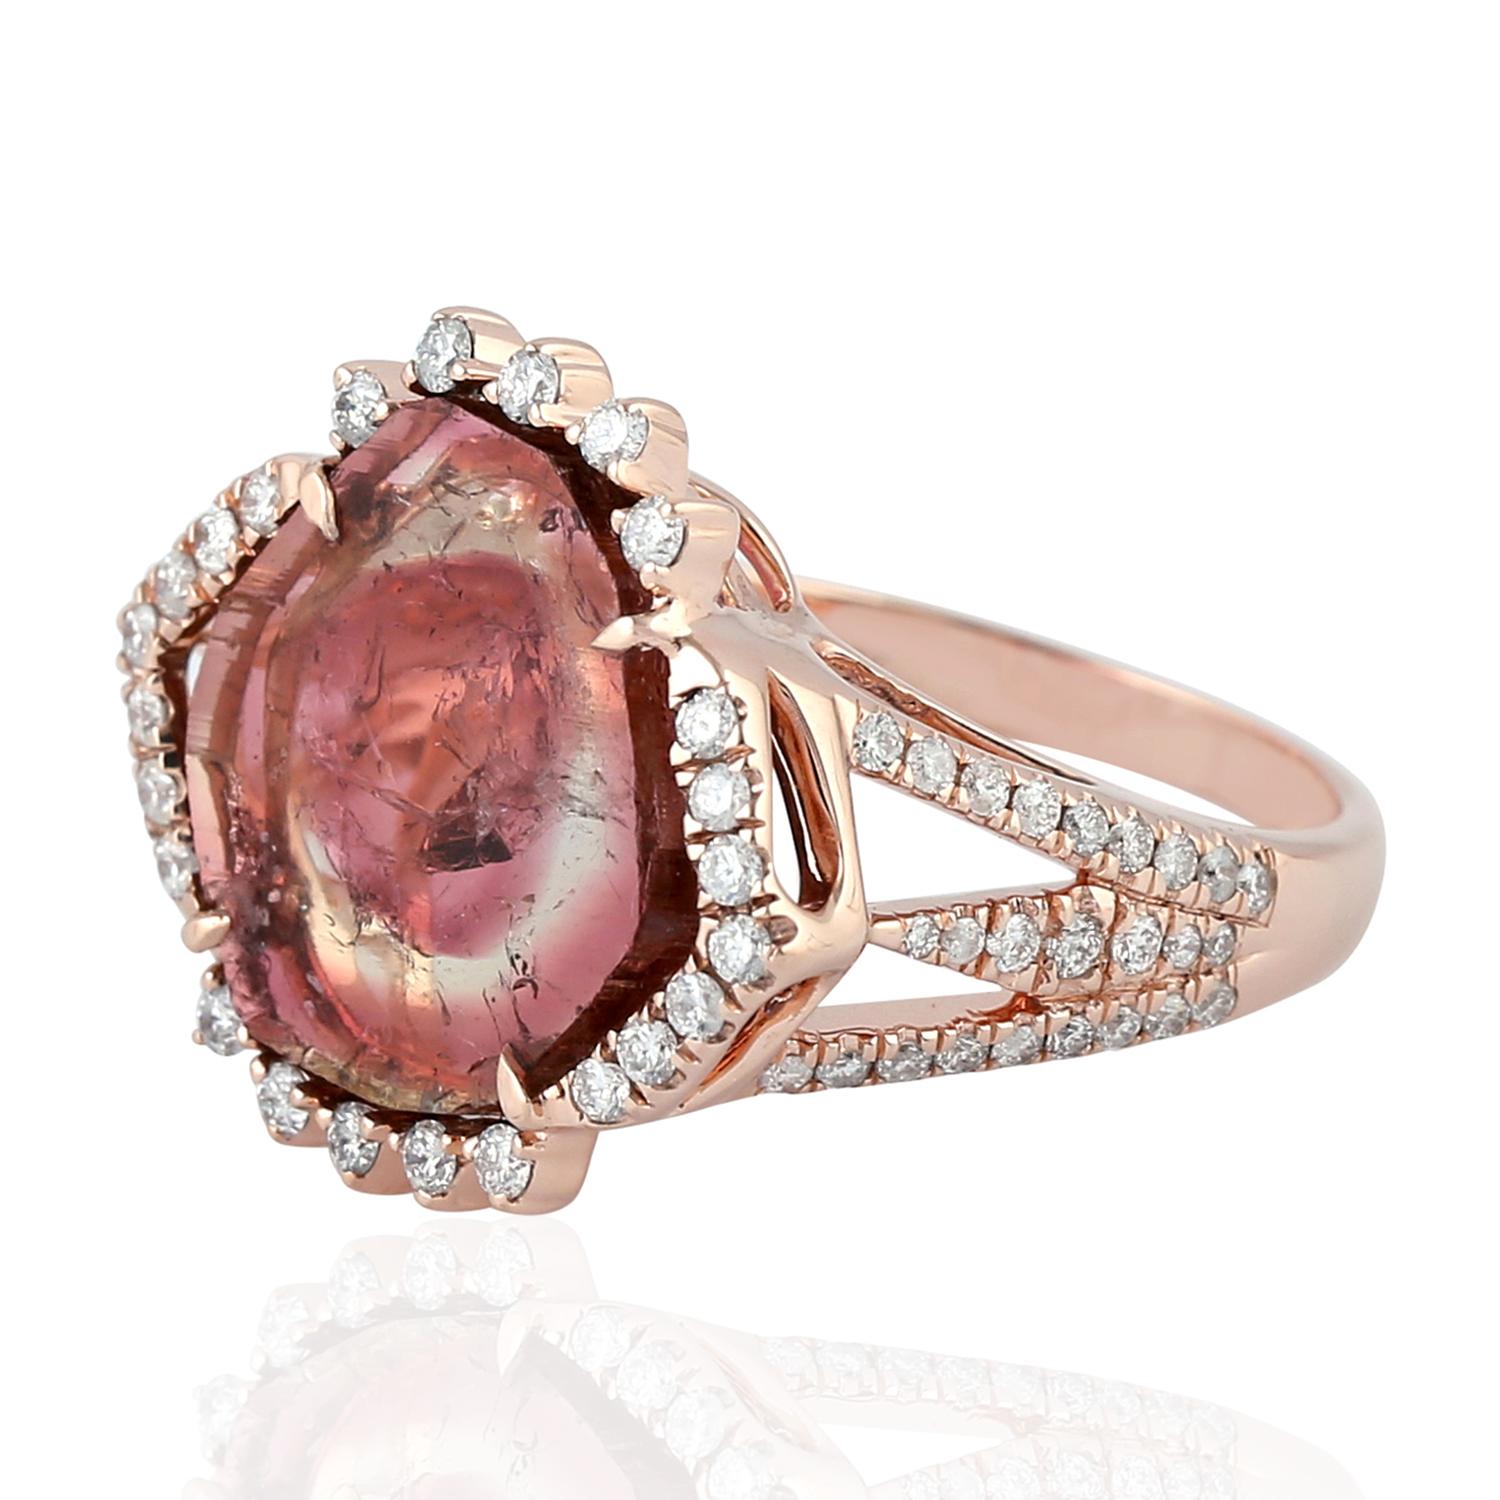 Mixed Cut Cocktail Ring with Tourmaline Surrounded by Pave Diamonds Made in 18k Gold For Sale